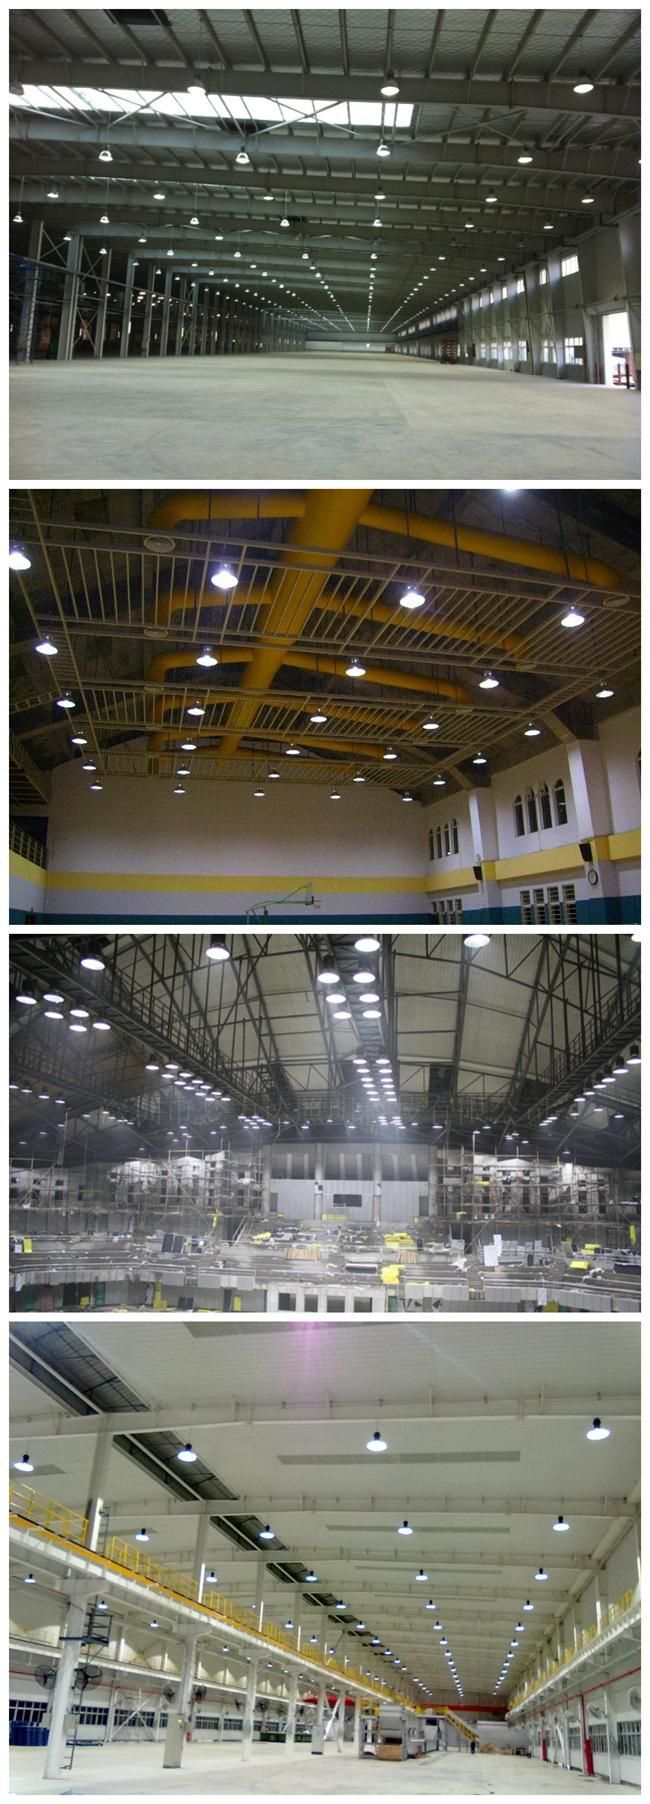 Meanwell Driver 100W 150W 200W Warehouse Factory Sale Cheap Price Industrial UFO LED High Bay Light